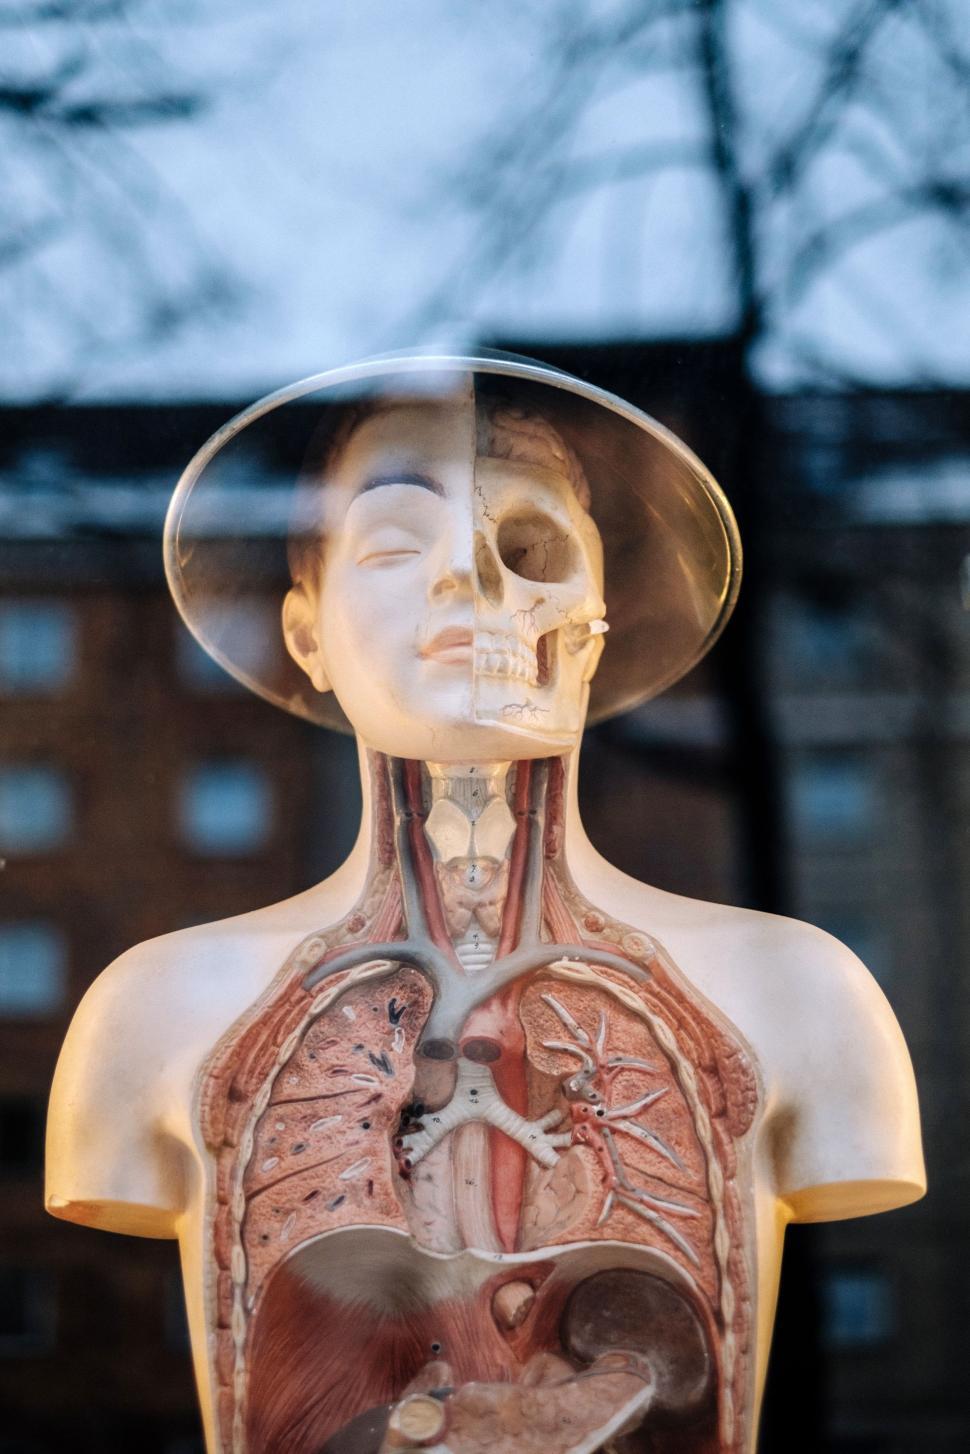 Free Image of Mannequin Wearing Hat Holding Human Body 